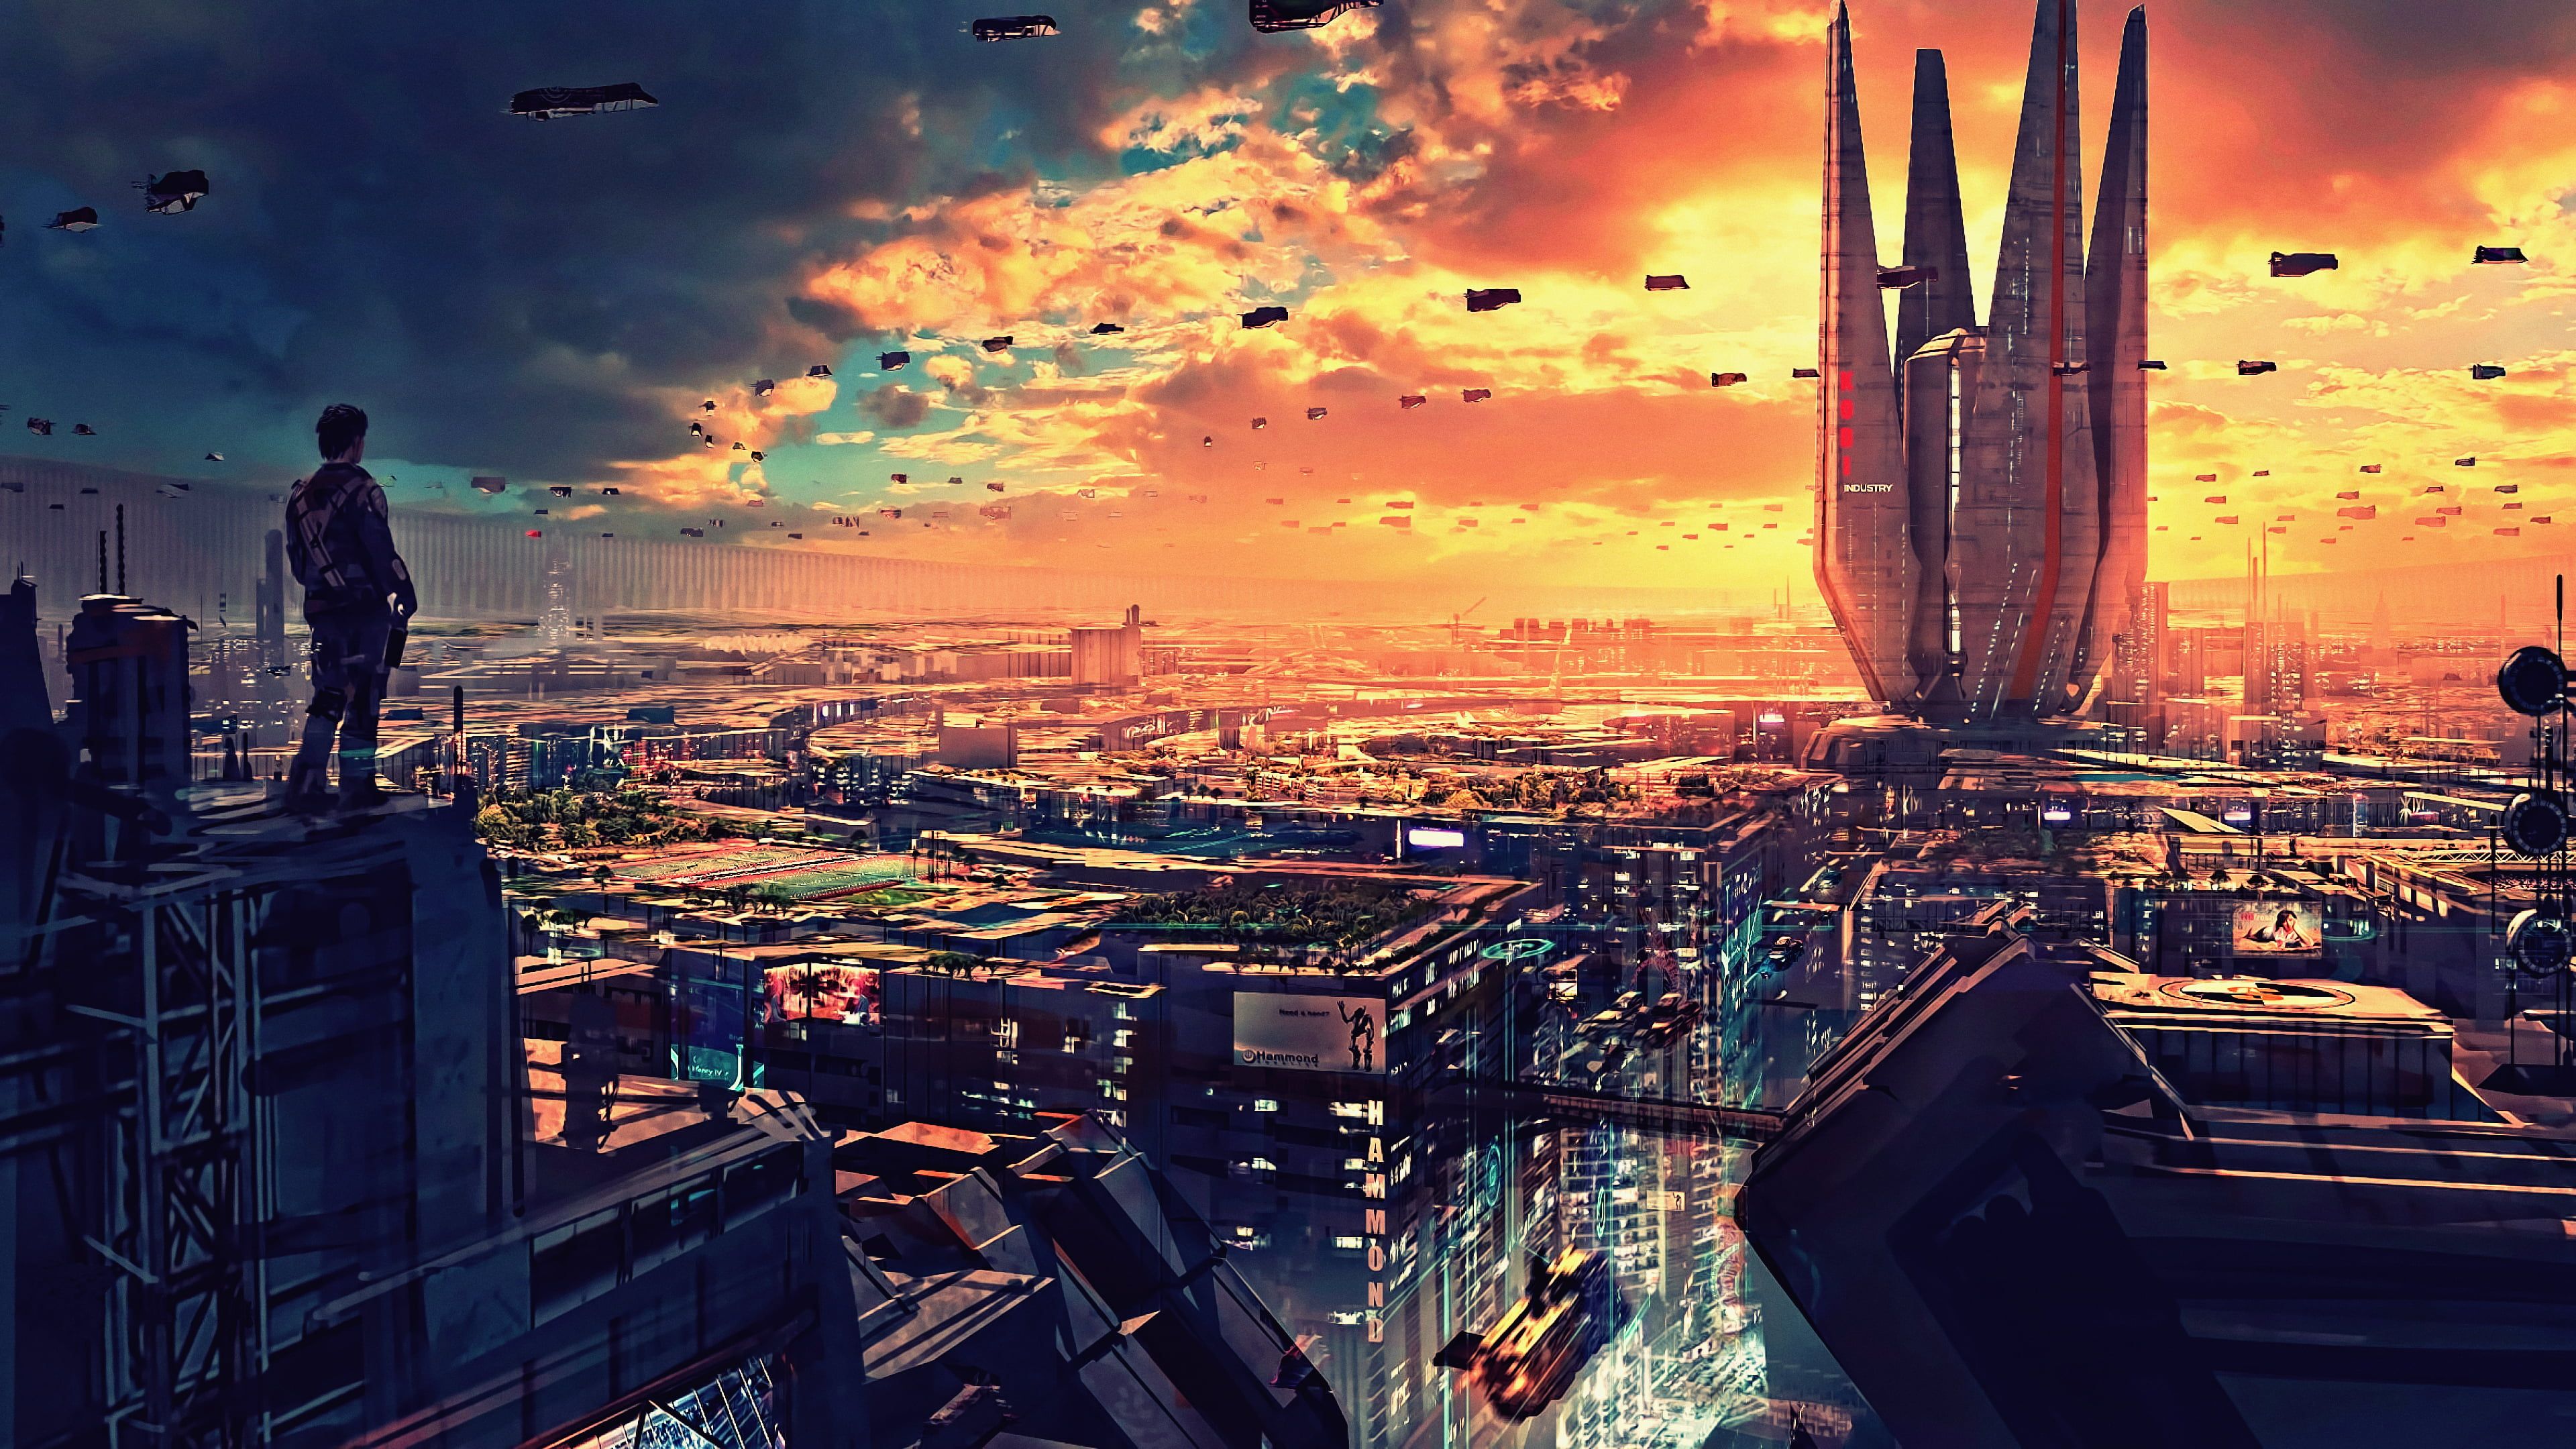 person standing on top of building wallpaper #artwork futuristic city science fiction digital art concept art. Futuristic city, Sci fi city, Cityscape wallpaper